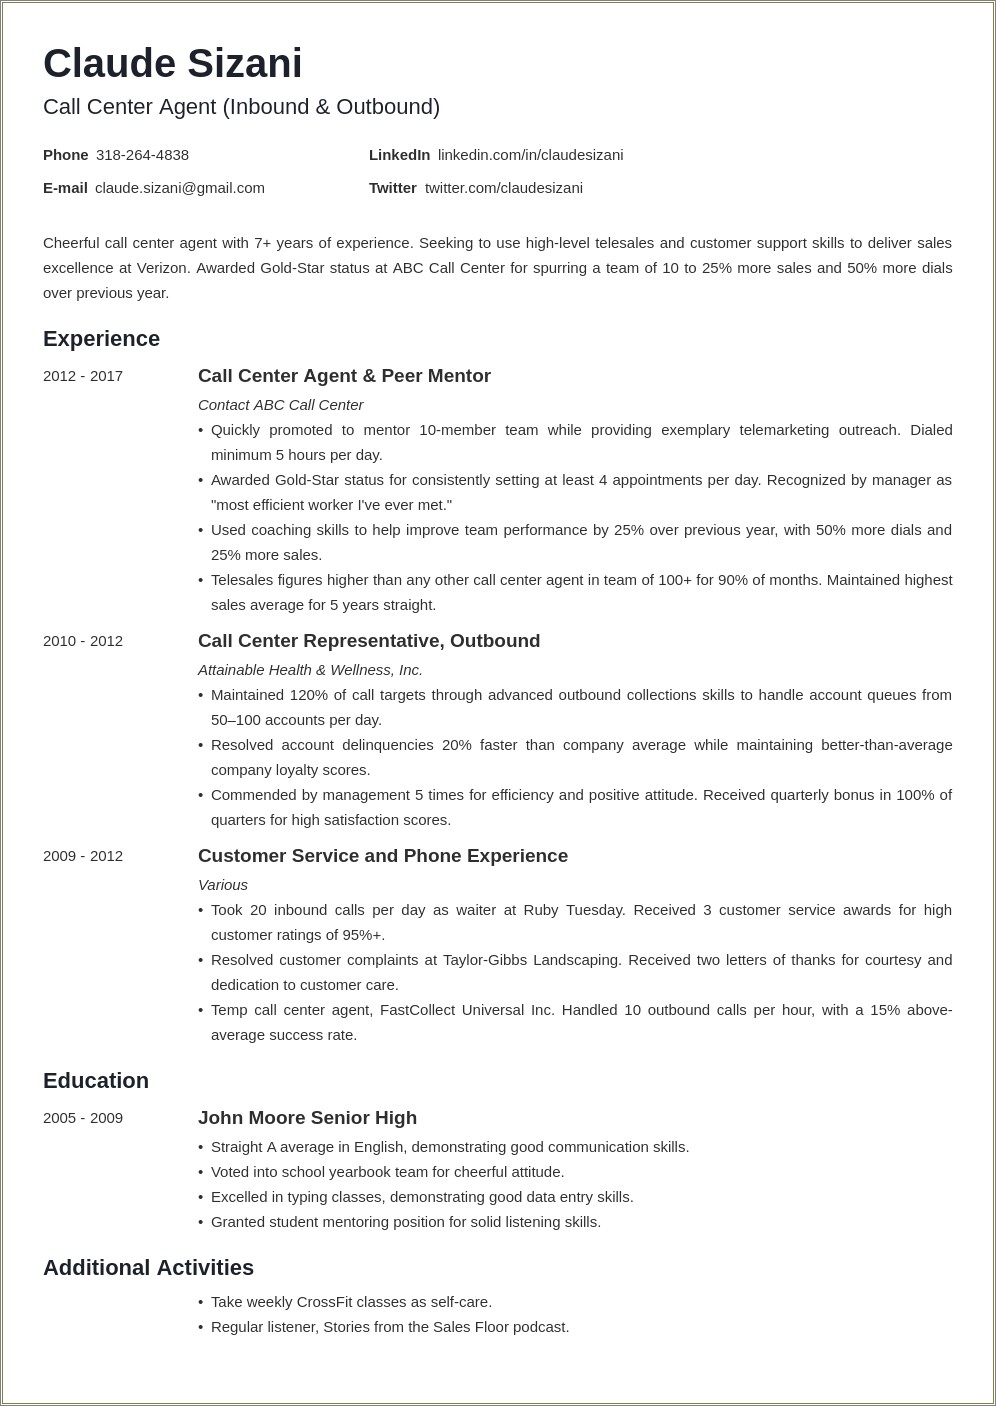 Best Resume Objectives For Call Center Agents